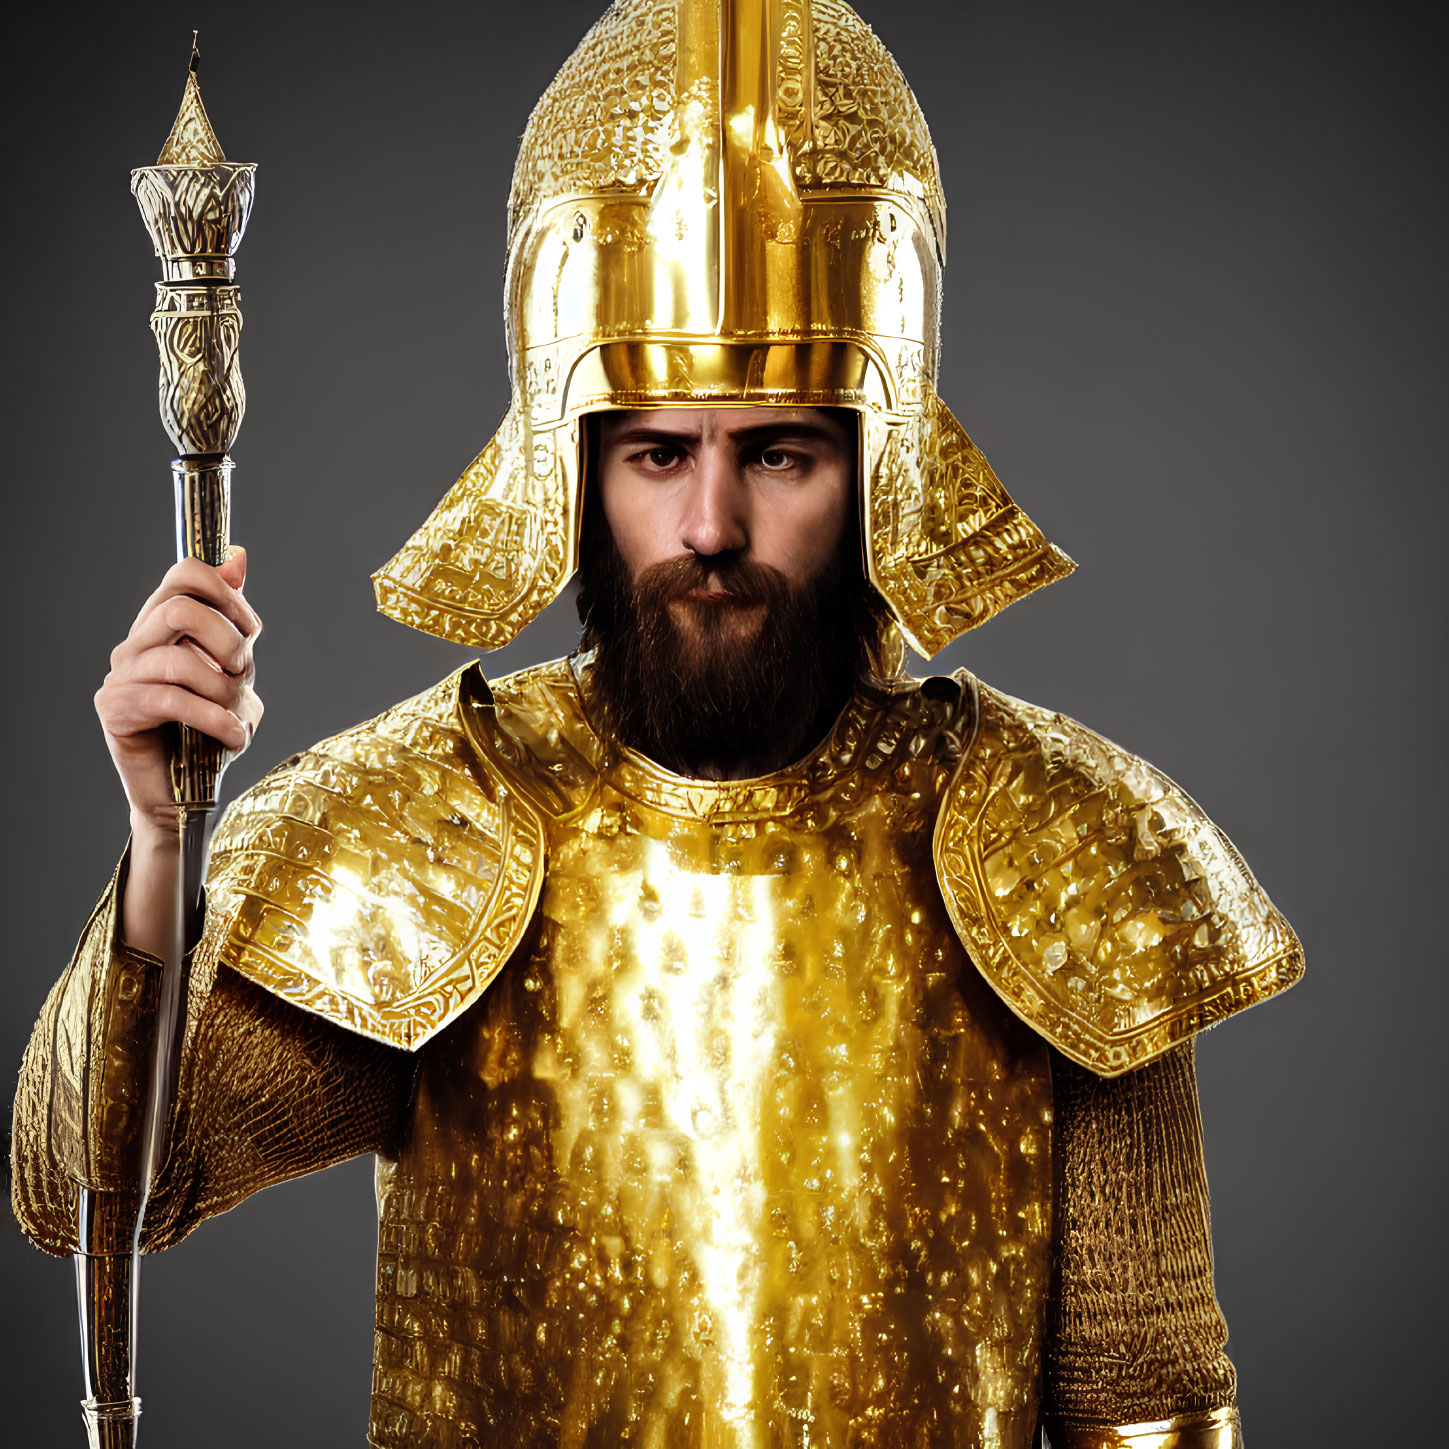 Man in ornate golden armor with spear on gray background